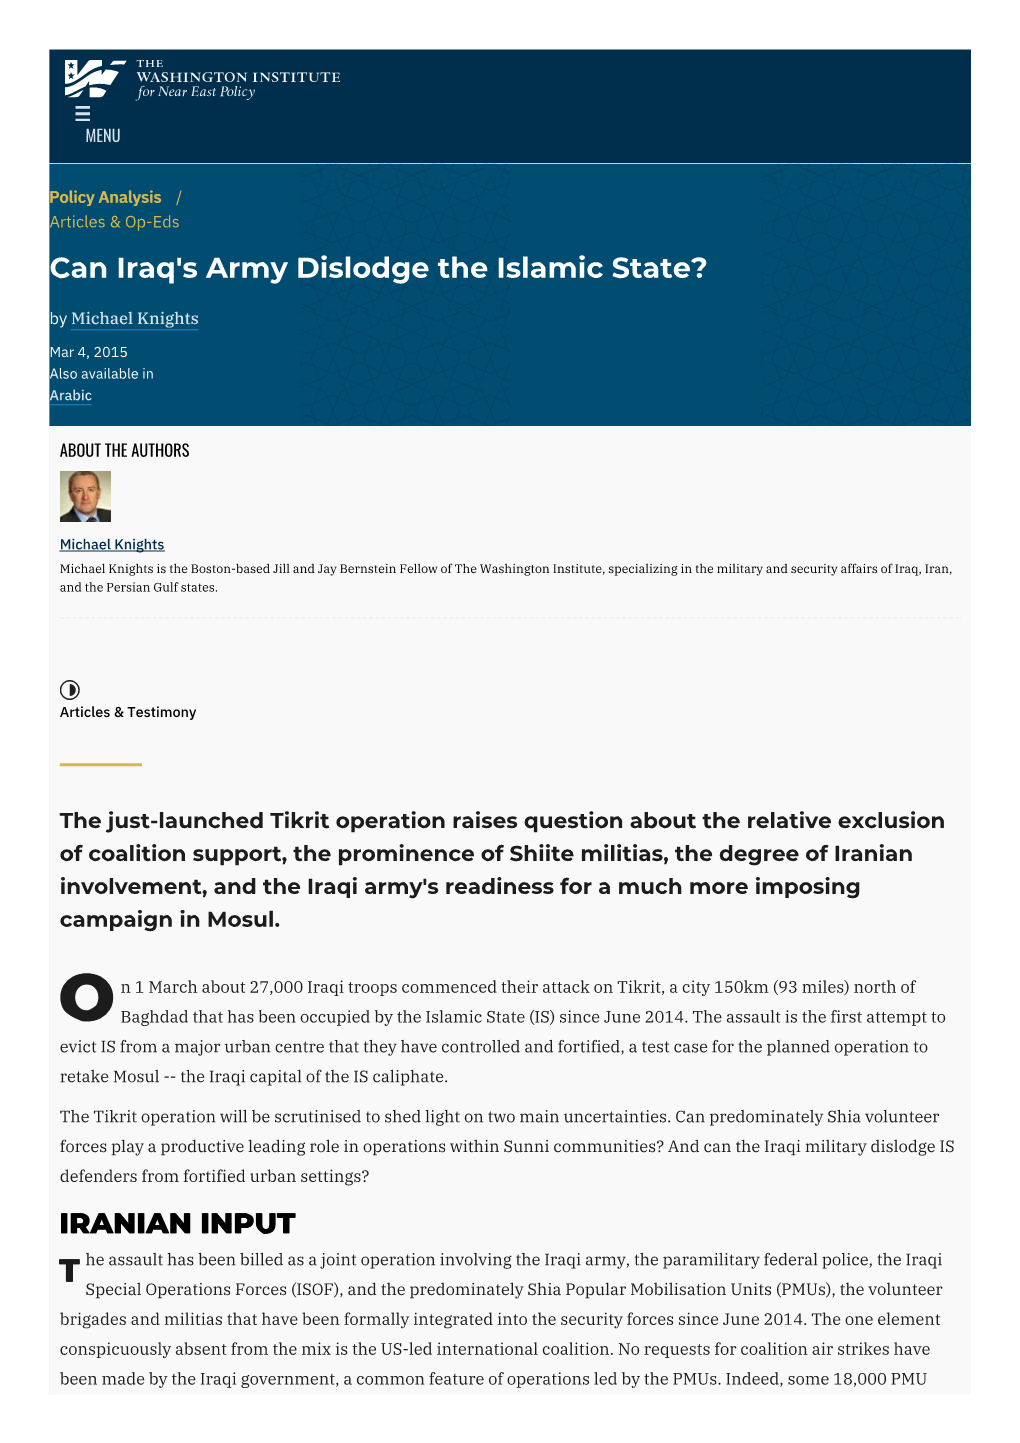 Can Iraq's Army Dislodge the Islamic State? | the Washington Institute